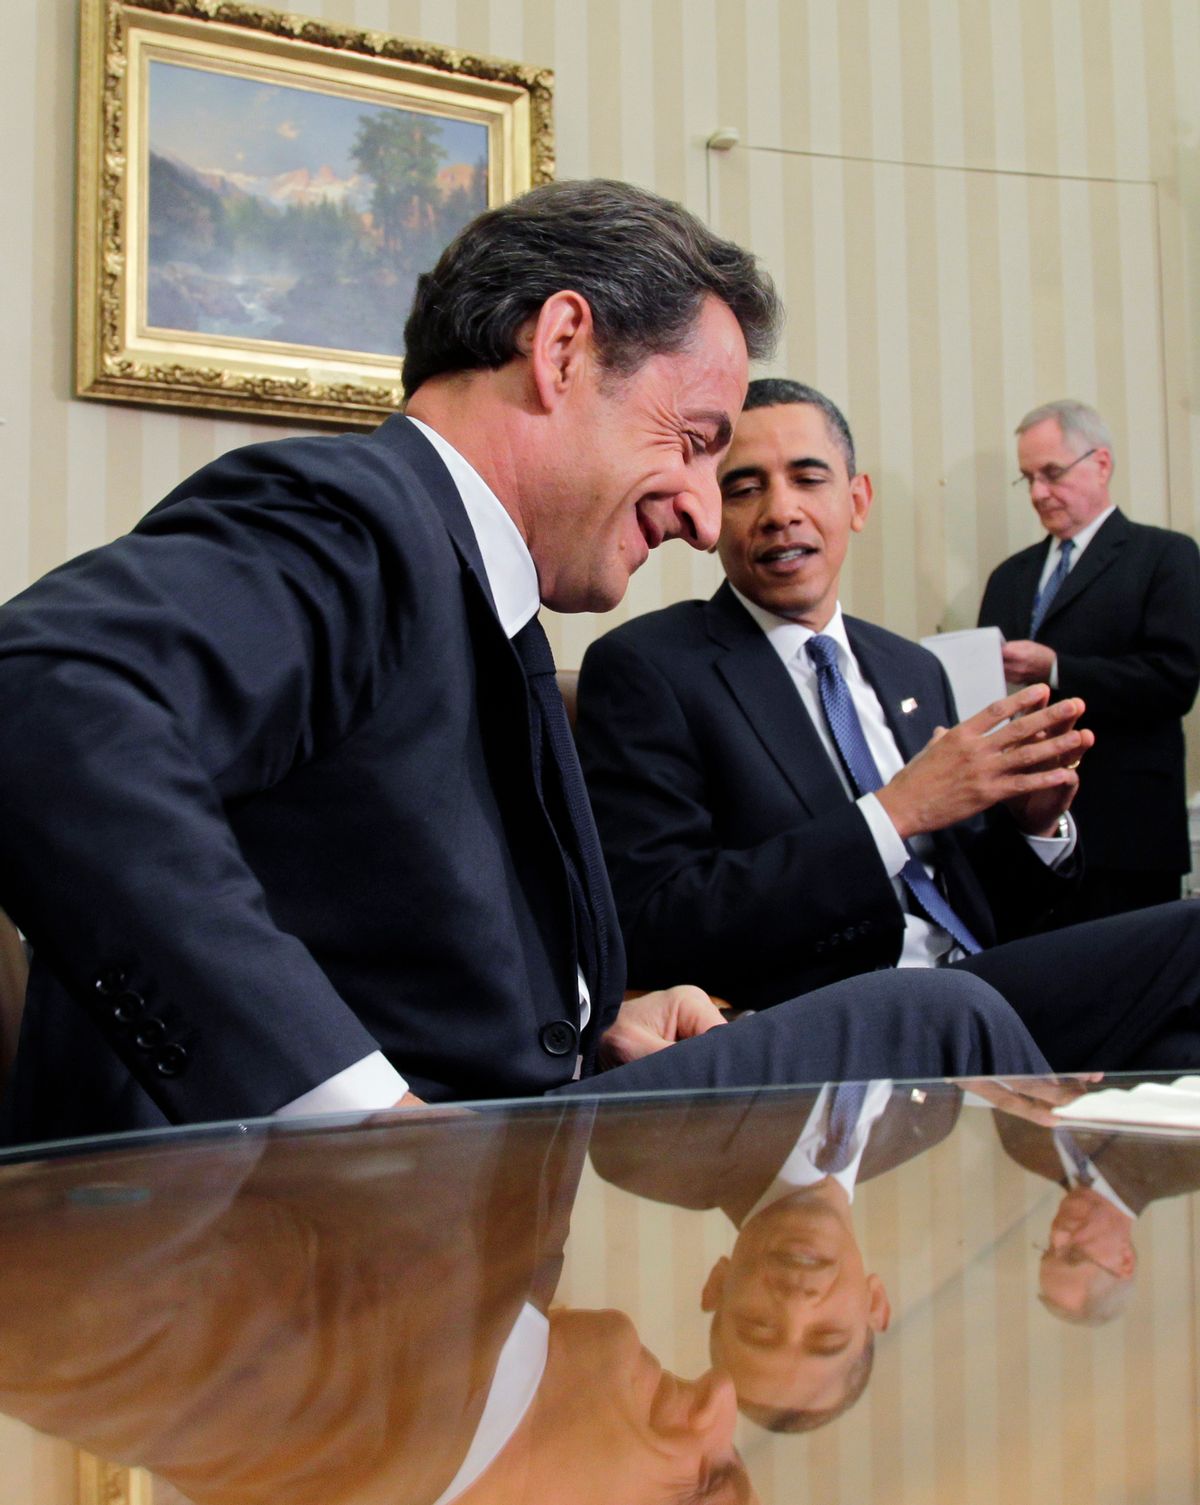 President Barack Obama meets with French President Nicolas Sarkozy in the Oval Office of the White House in Washington, Monday, Jan. 10, 2011. (AP Photo/J. Scott Applewhite)  (Associated Press)